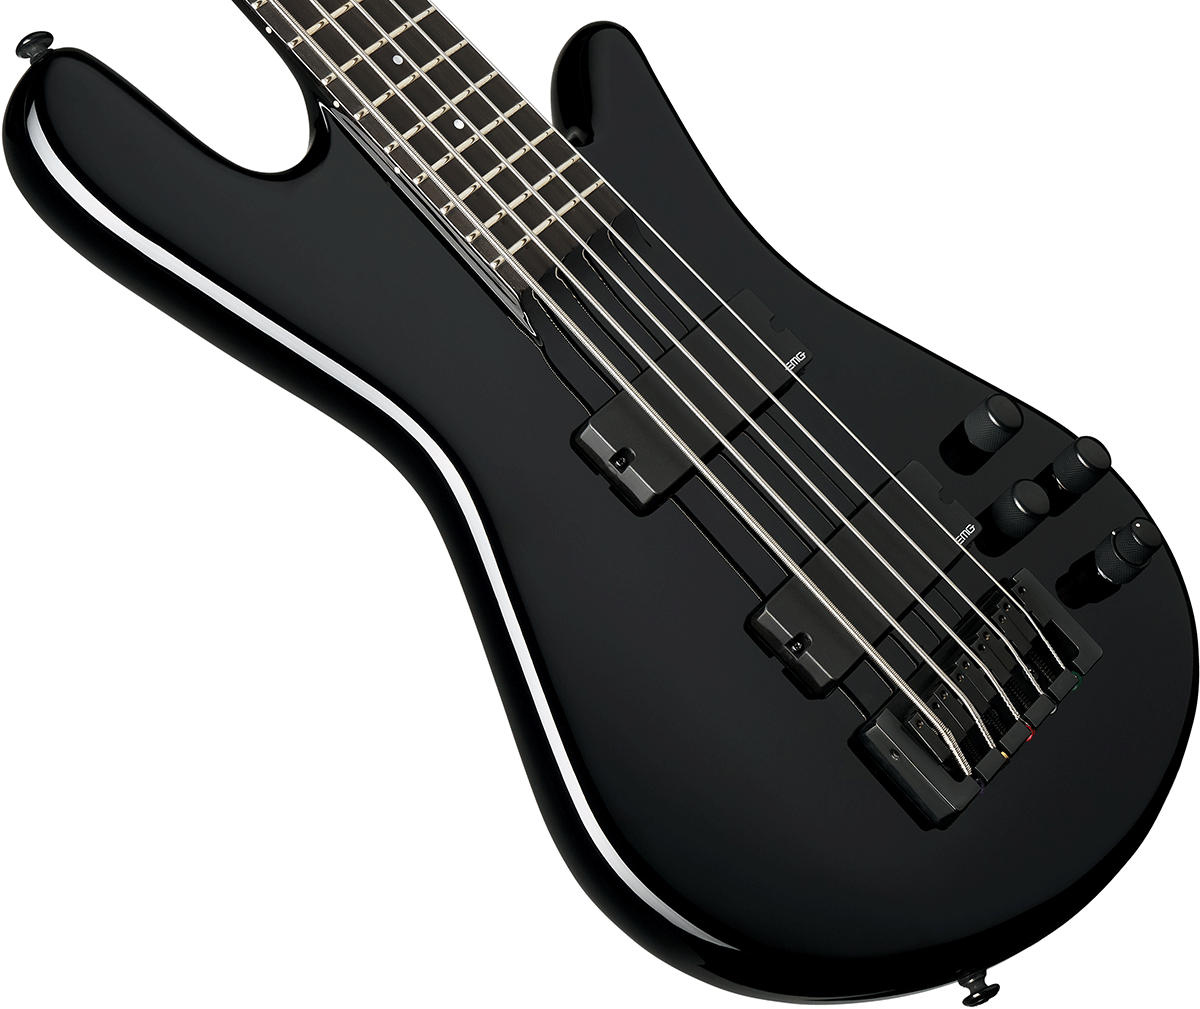 Spector Ns Ethos Hp 5 Eb - Solid Black Gloss - Solidbody E-bass - Variation 2